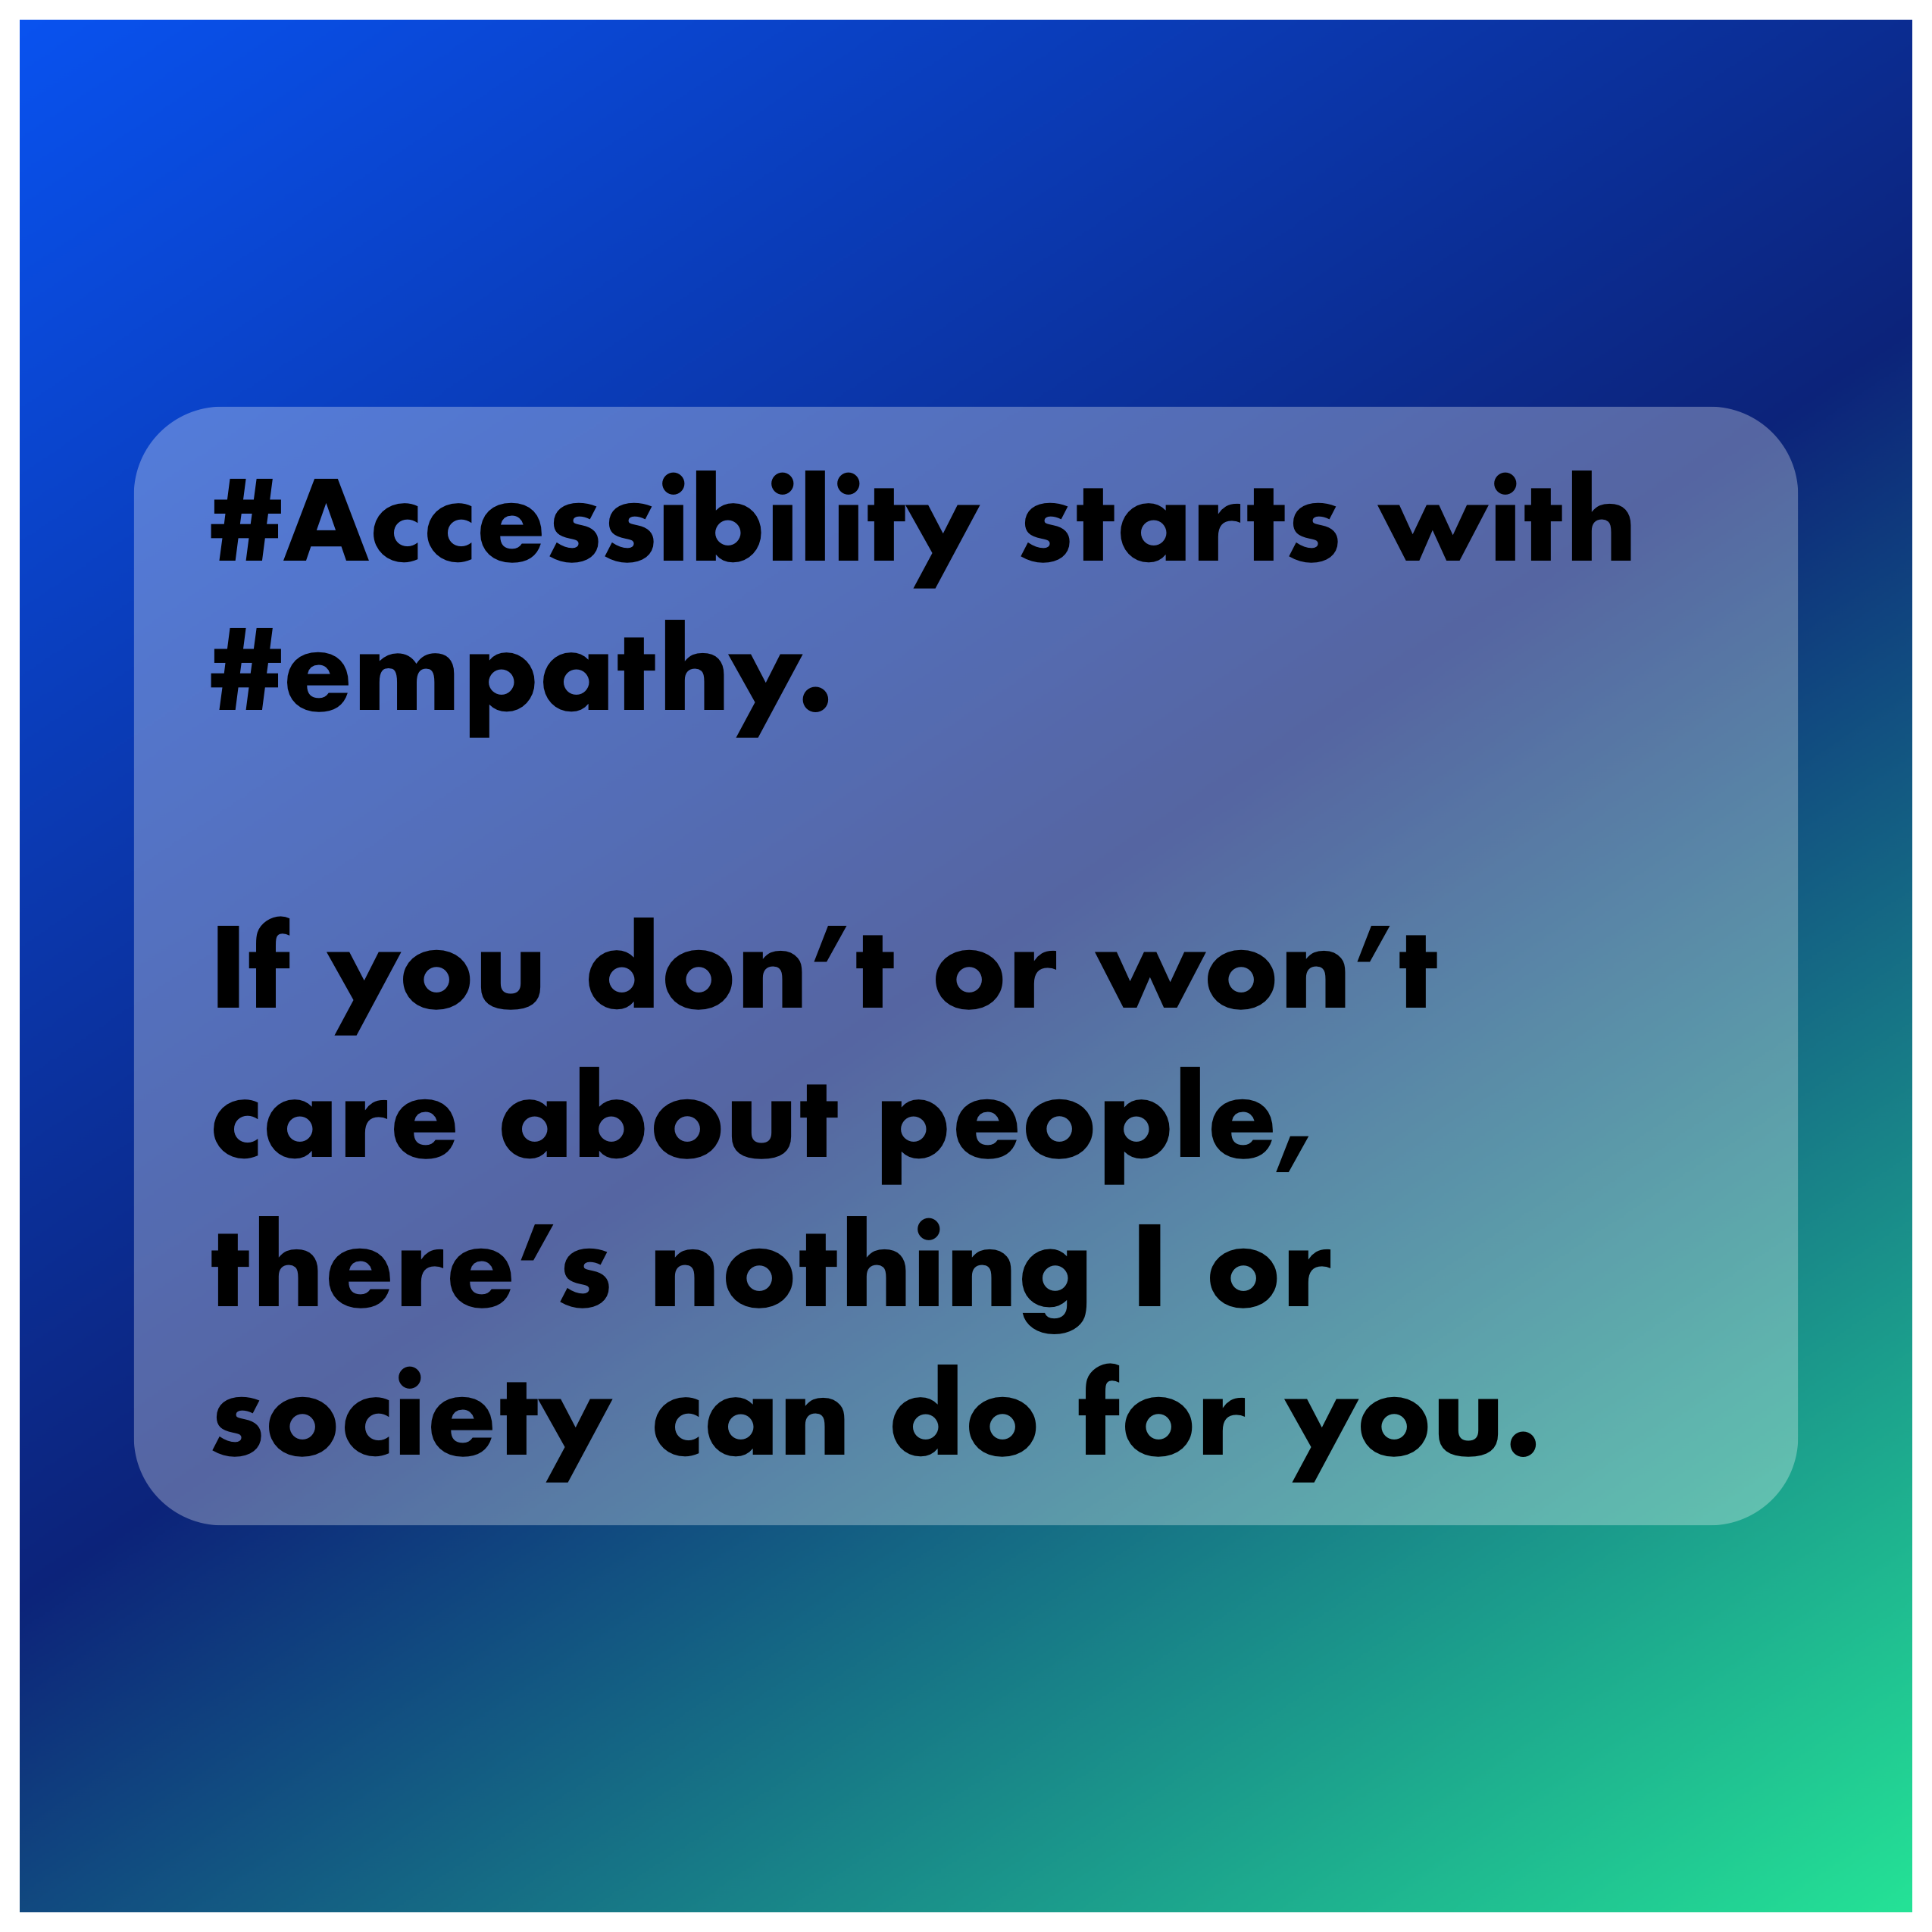 Accessibility starts with empathy. If you don’t or won’t care about people there’s nothing I or society can do for you.